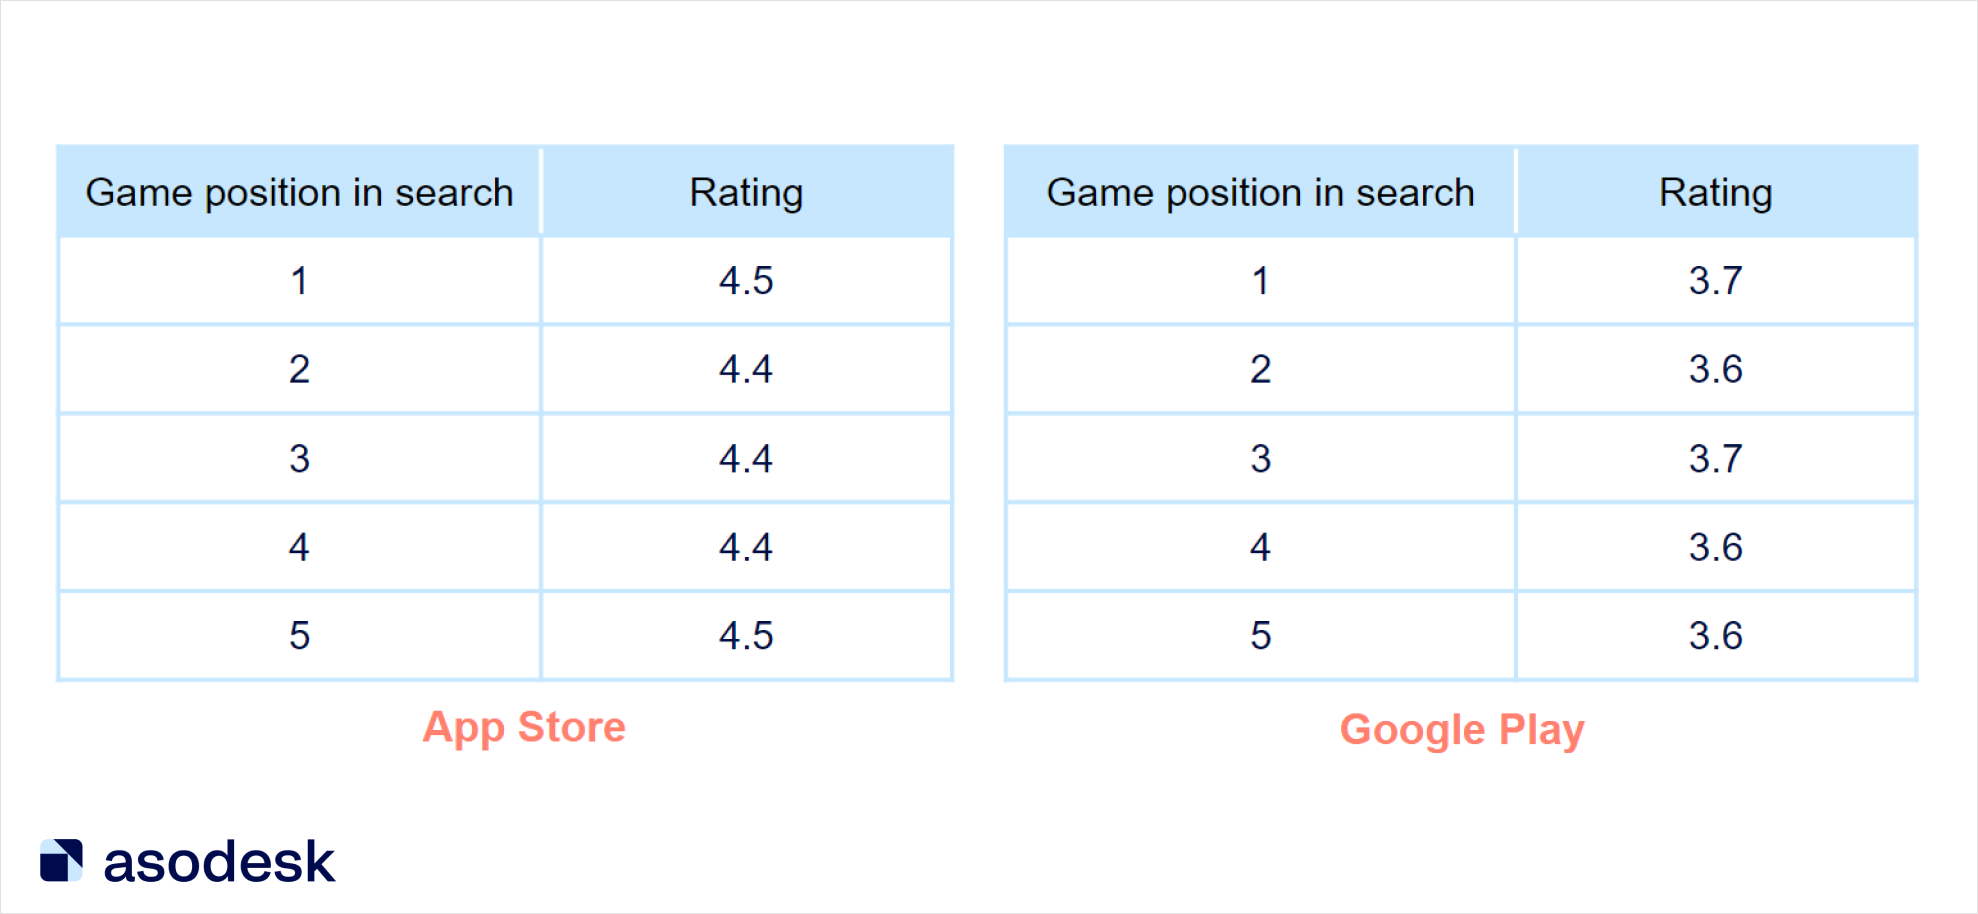 Ratings of the top mobile games on the App Store and Google Play